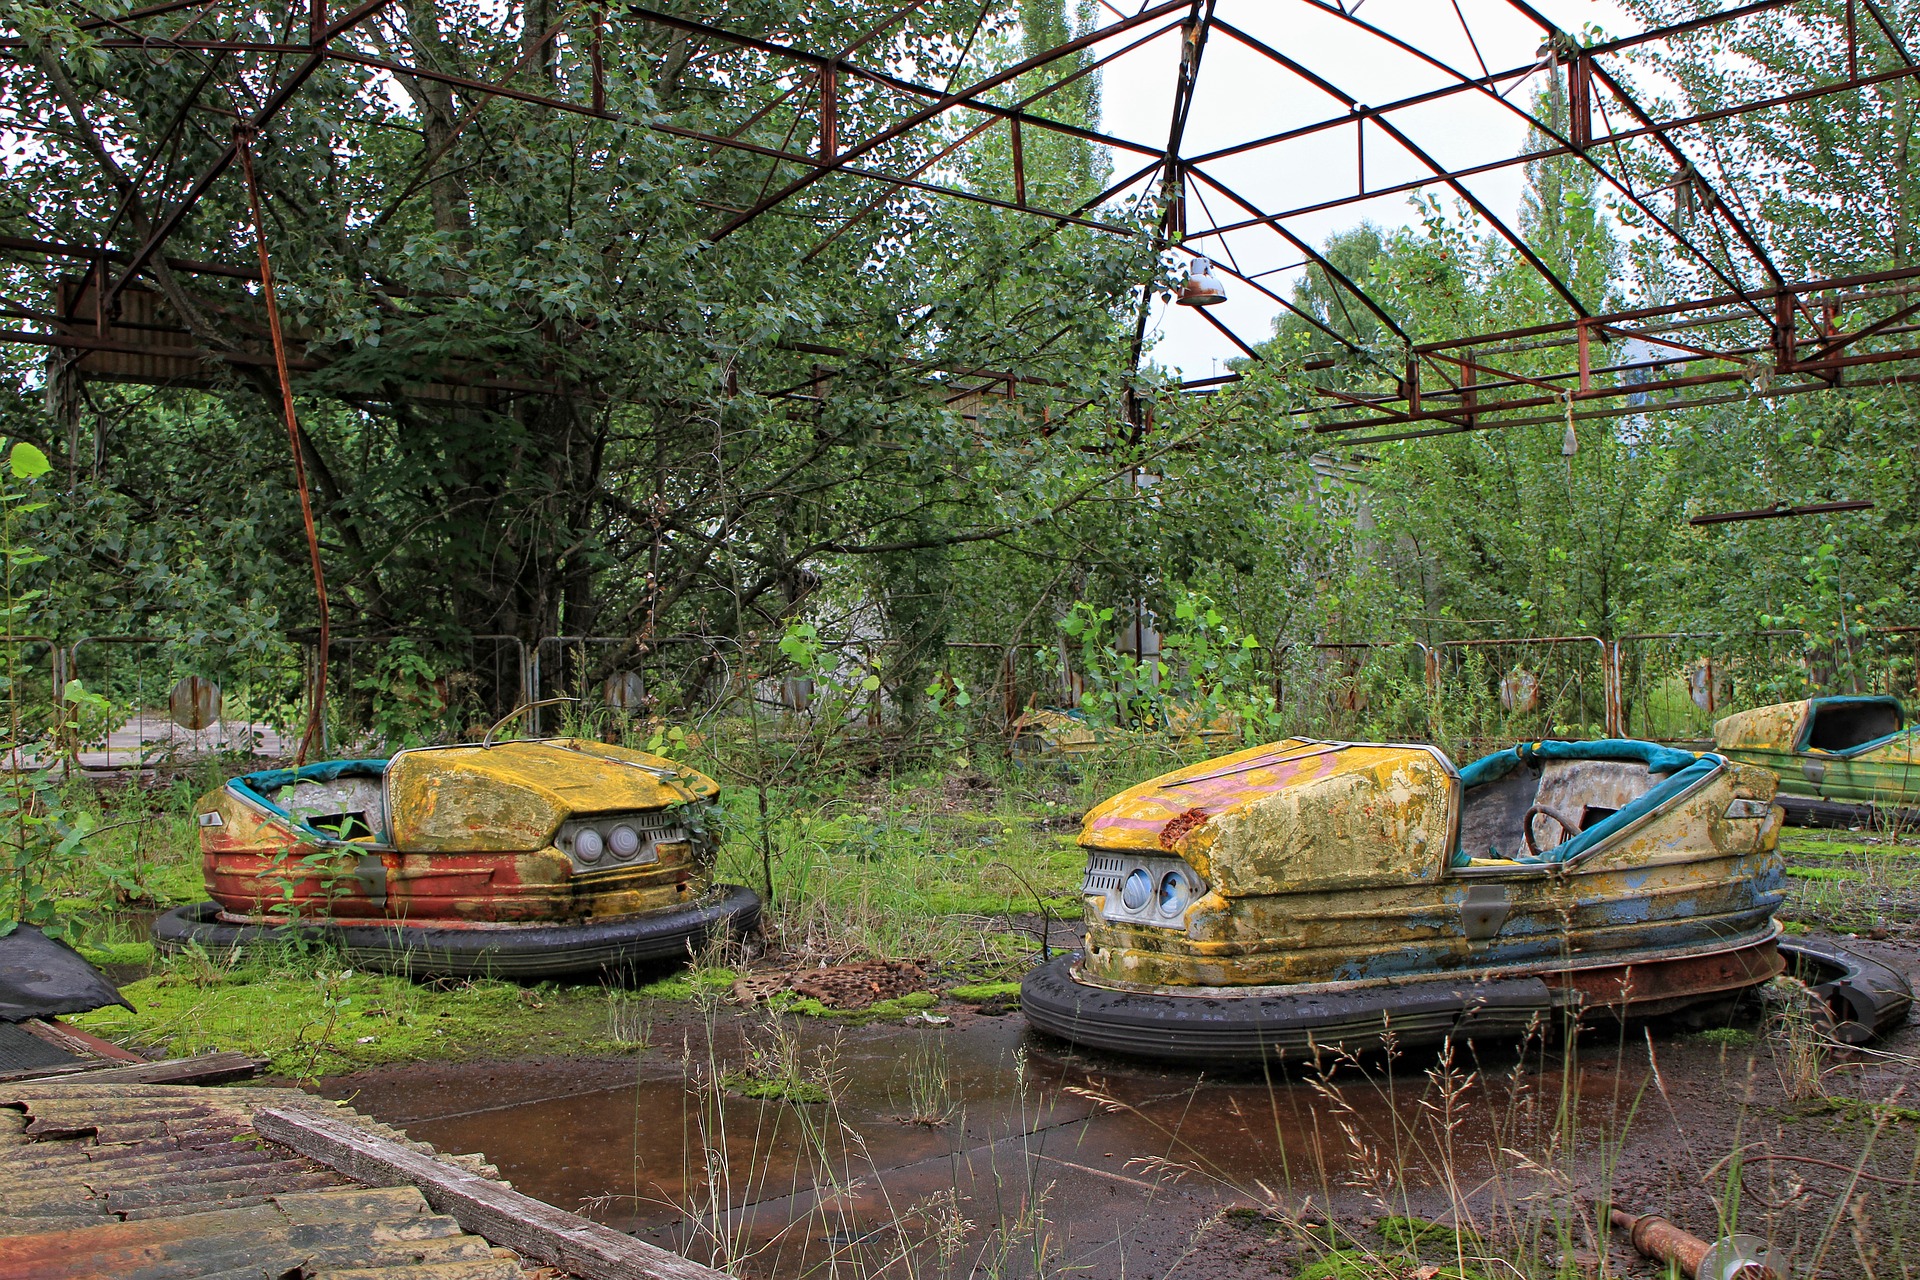 Chernobyl disaster is a popular dark tourism attraction.